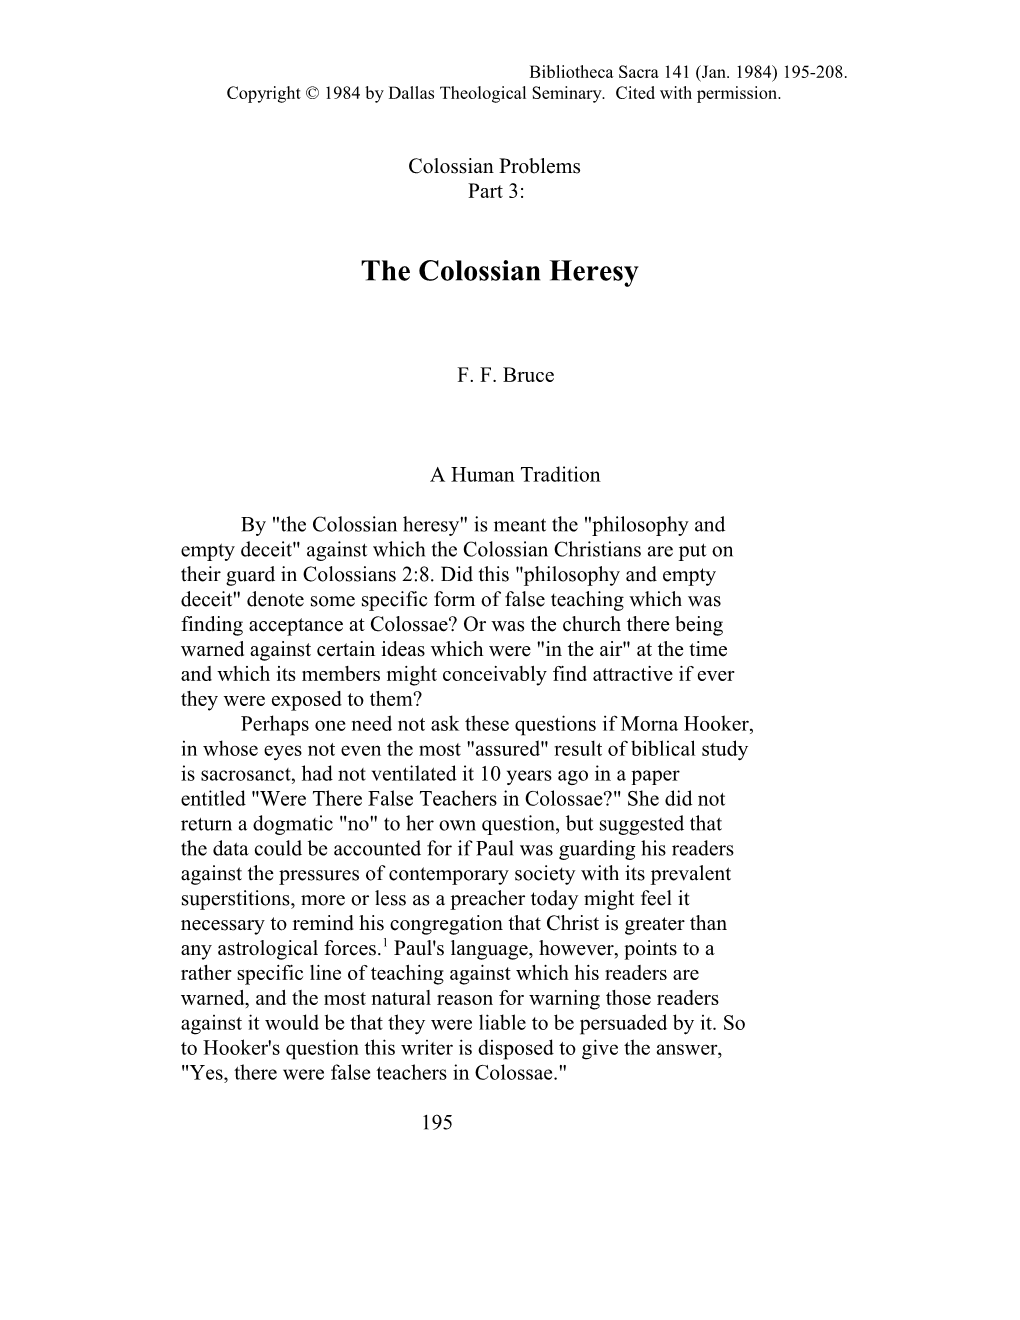 The Colossian Heresy: Part 3: Colossian Problems